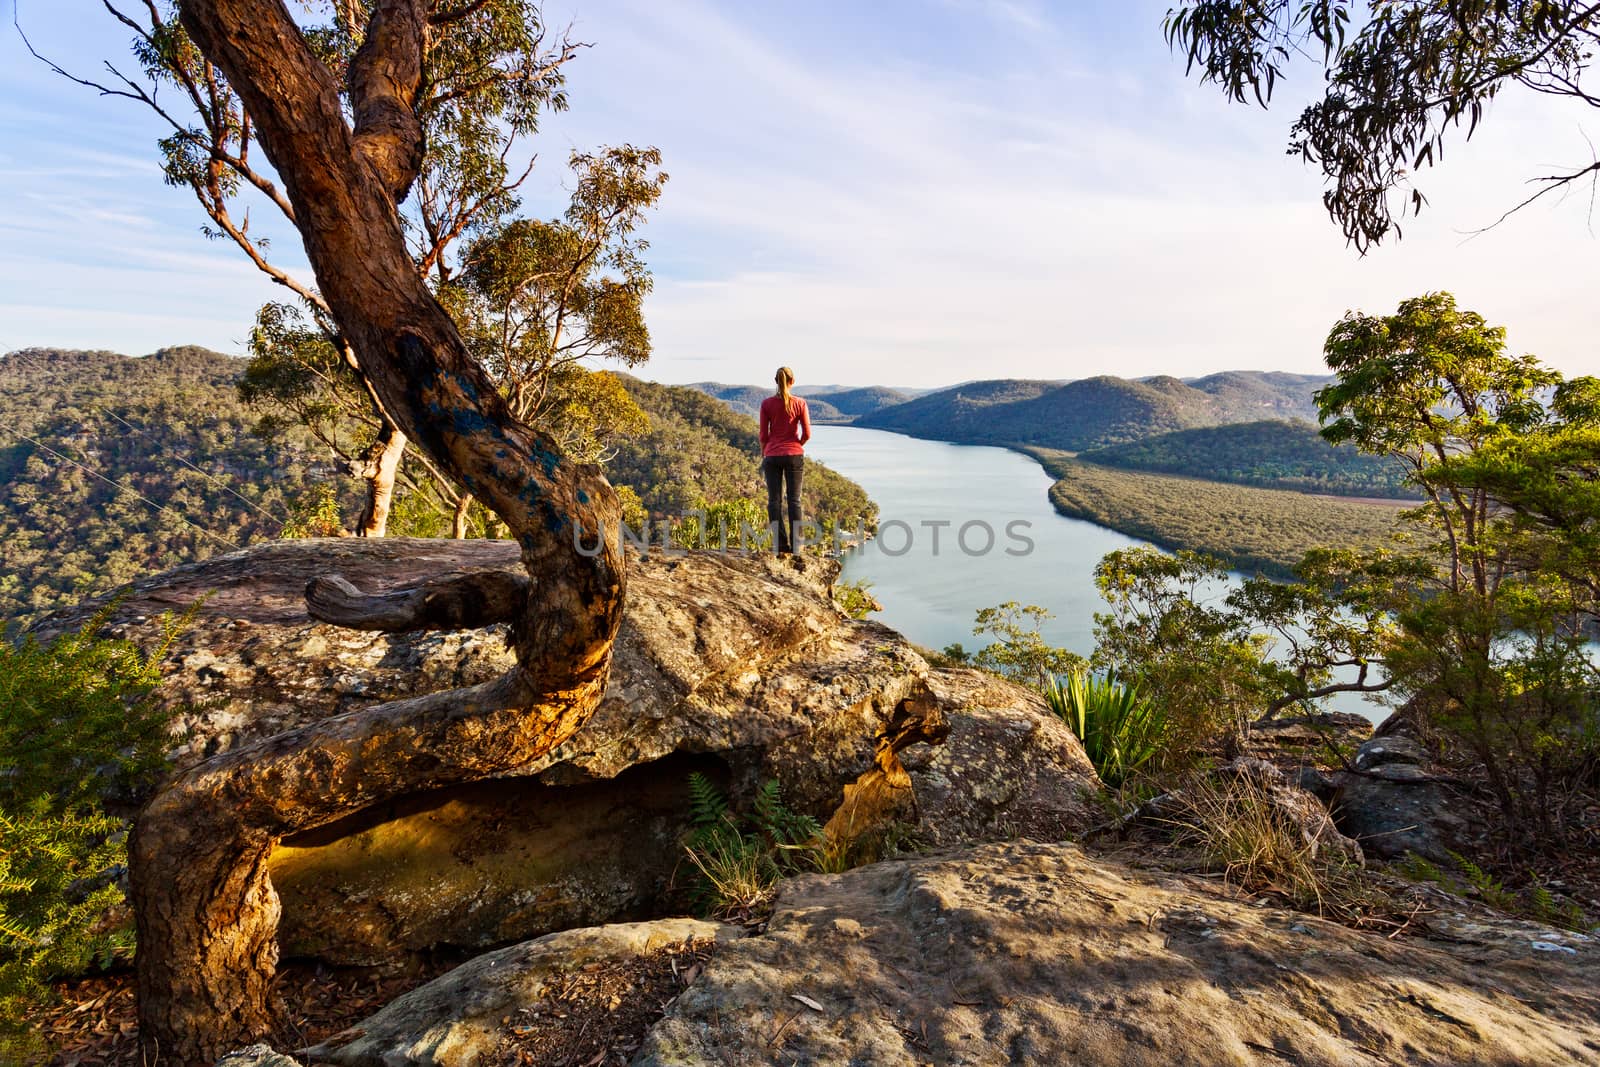 Tourist admiring the scenic river views high from a rocky cliff ledge by lovleah